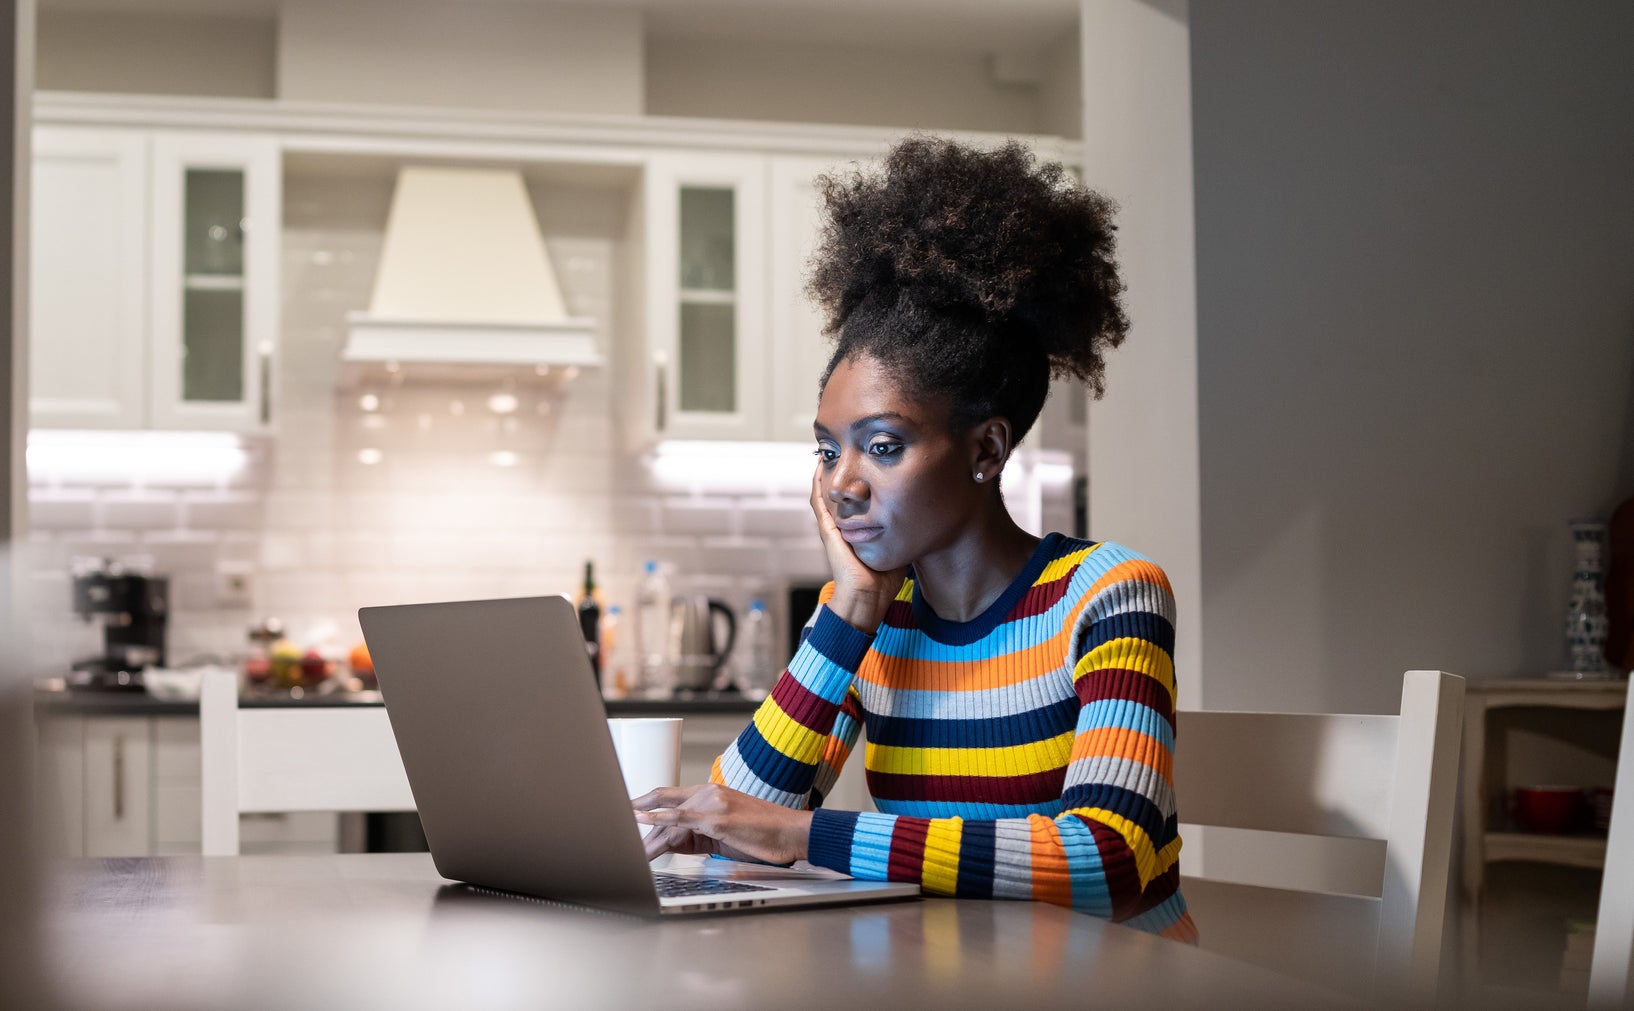 Woman in striped top works on laptop in a home kitchen, focused on screen